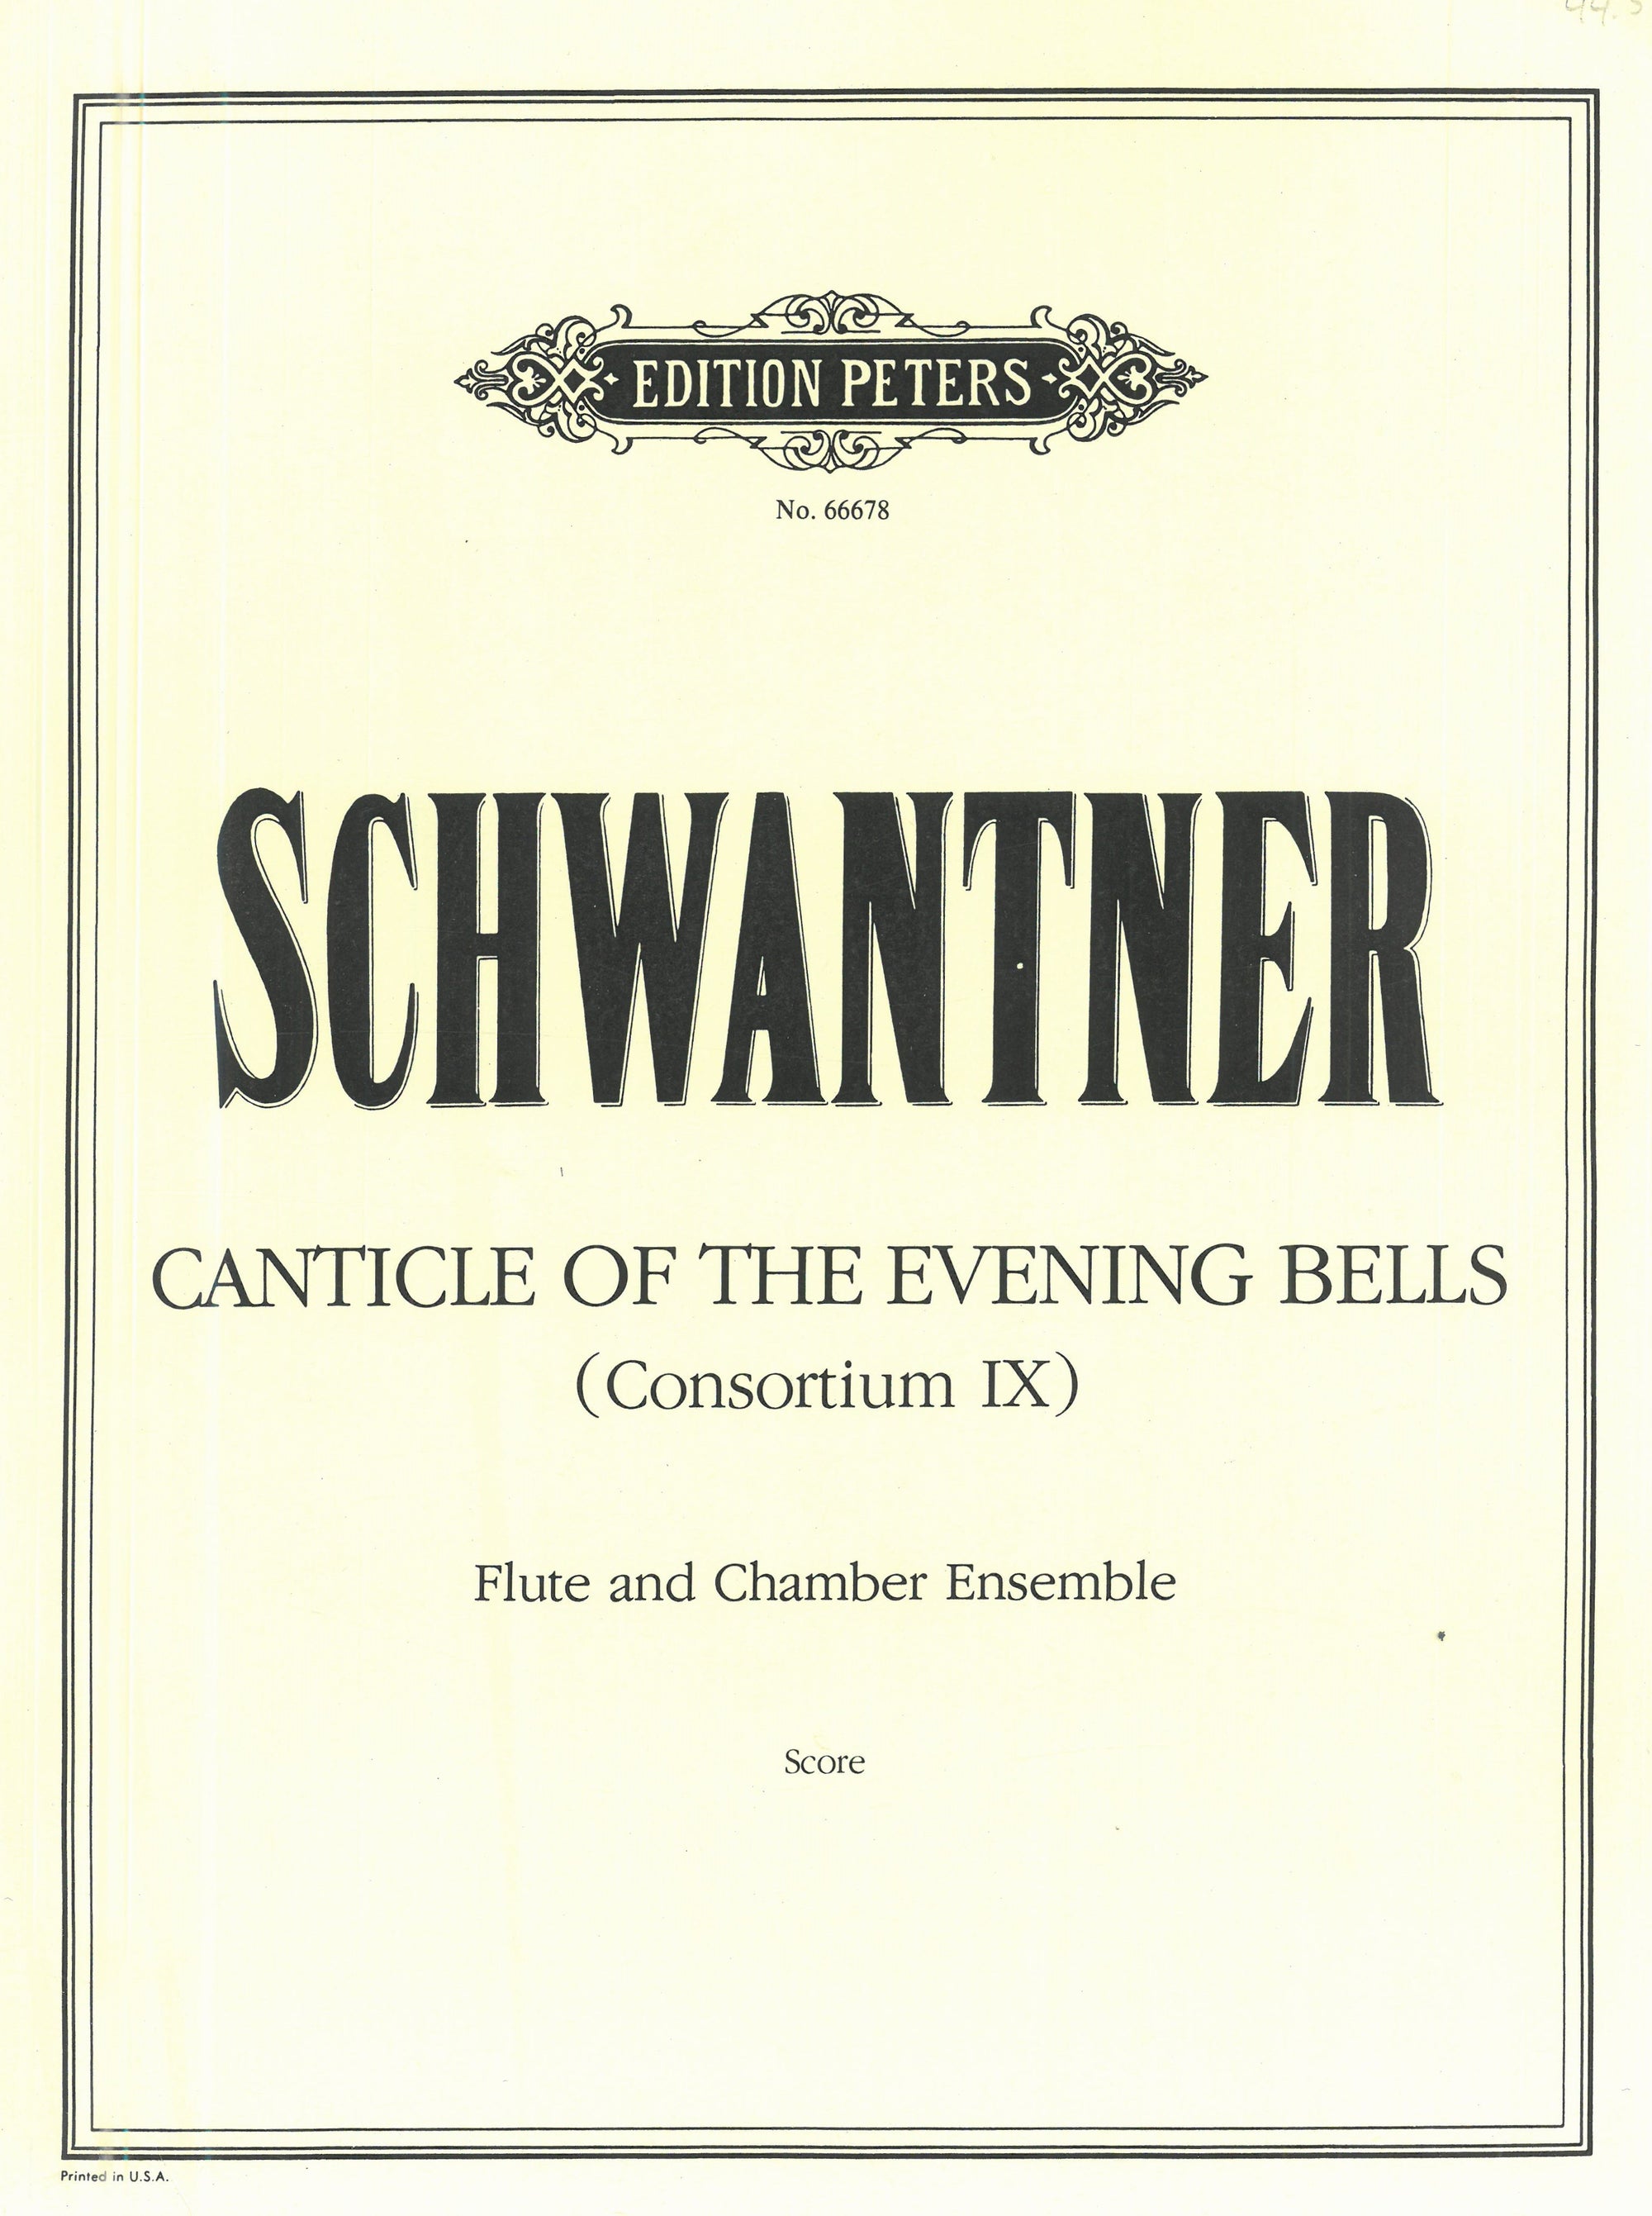 Schwantner: Canticle of the Evening Bells